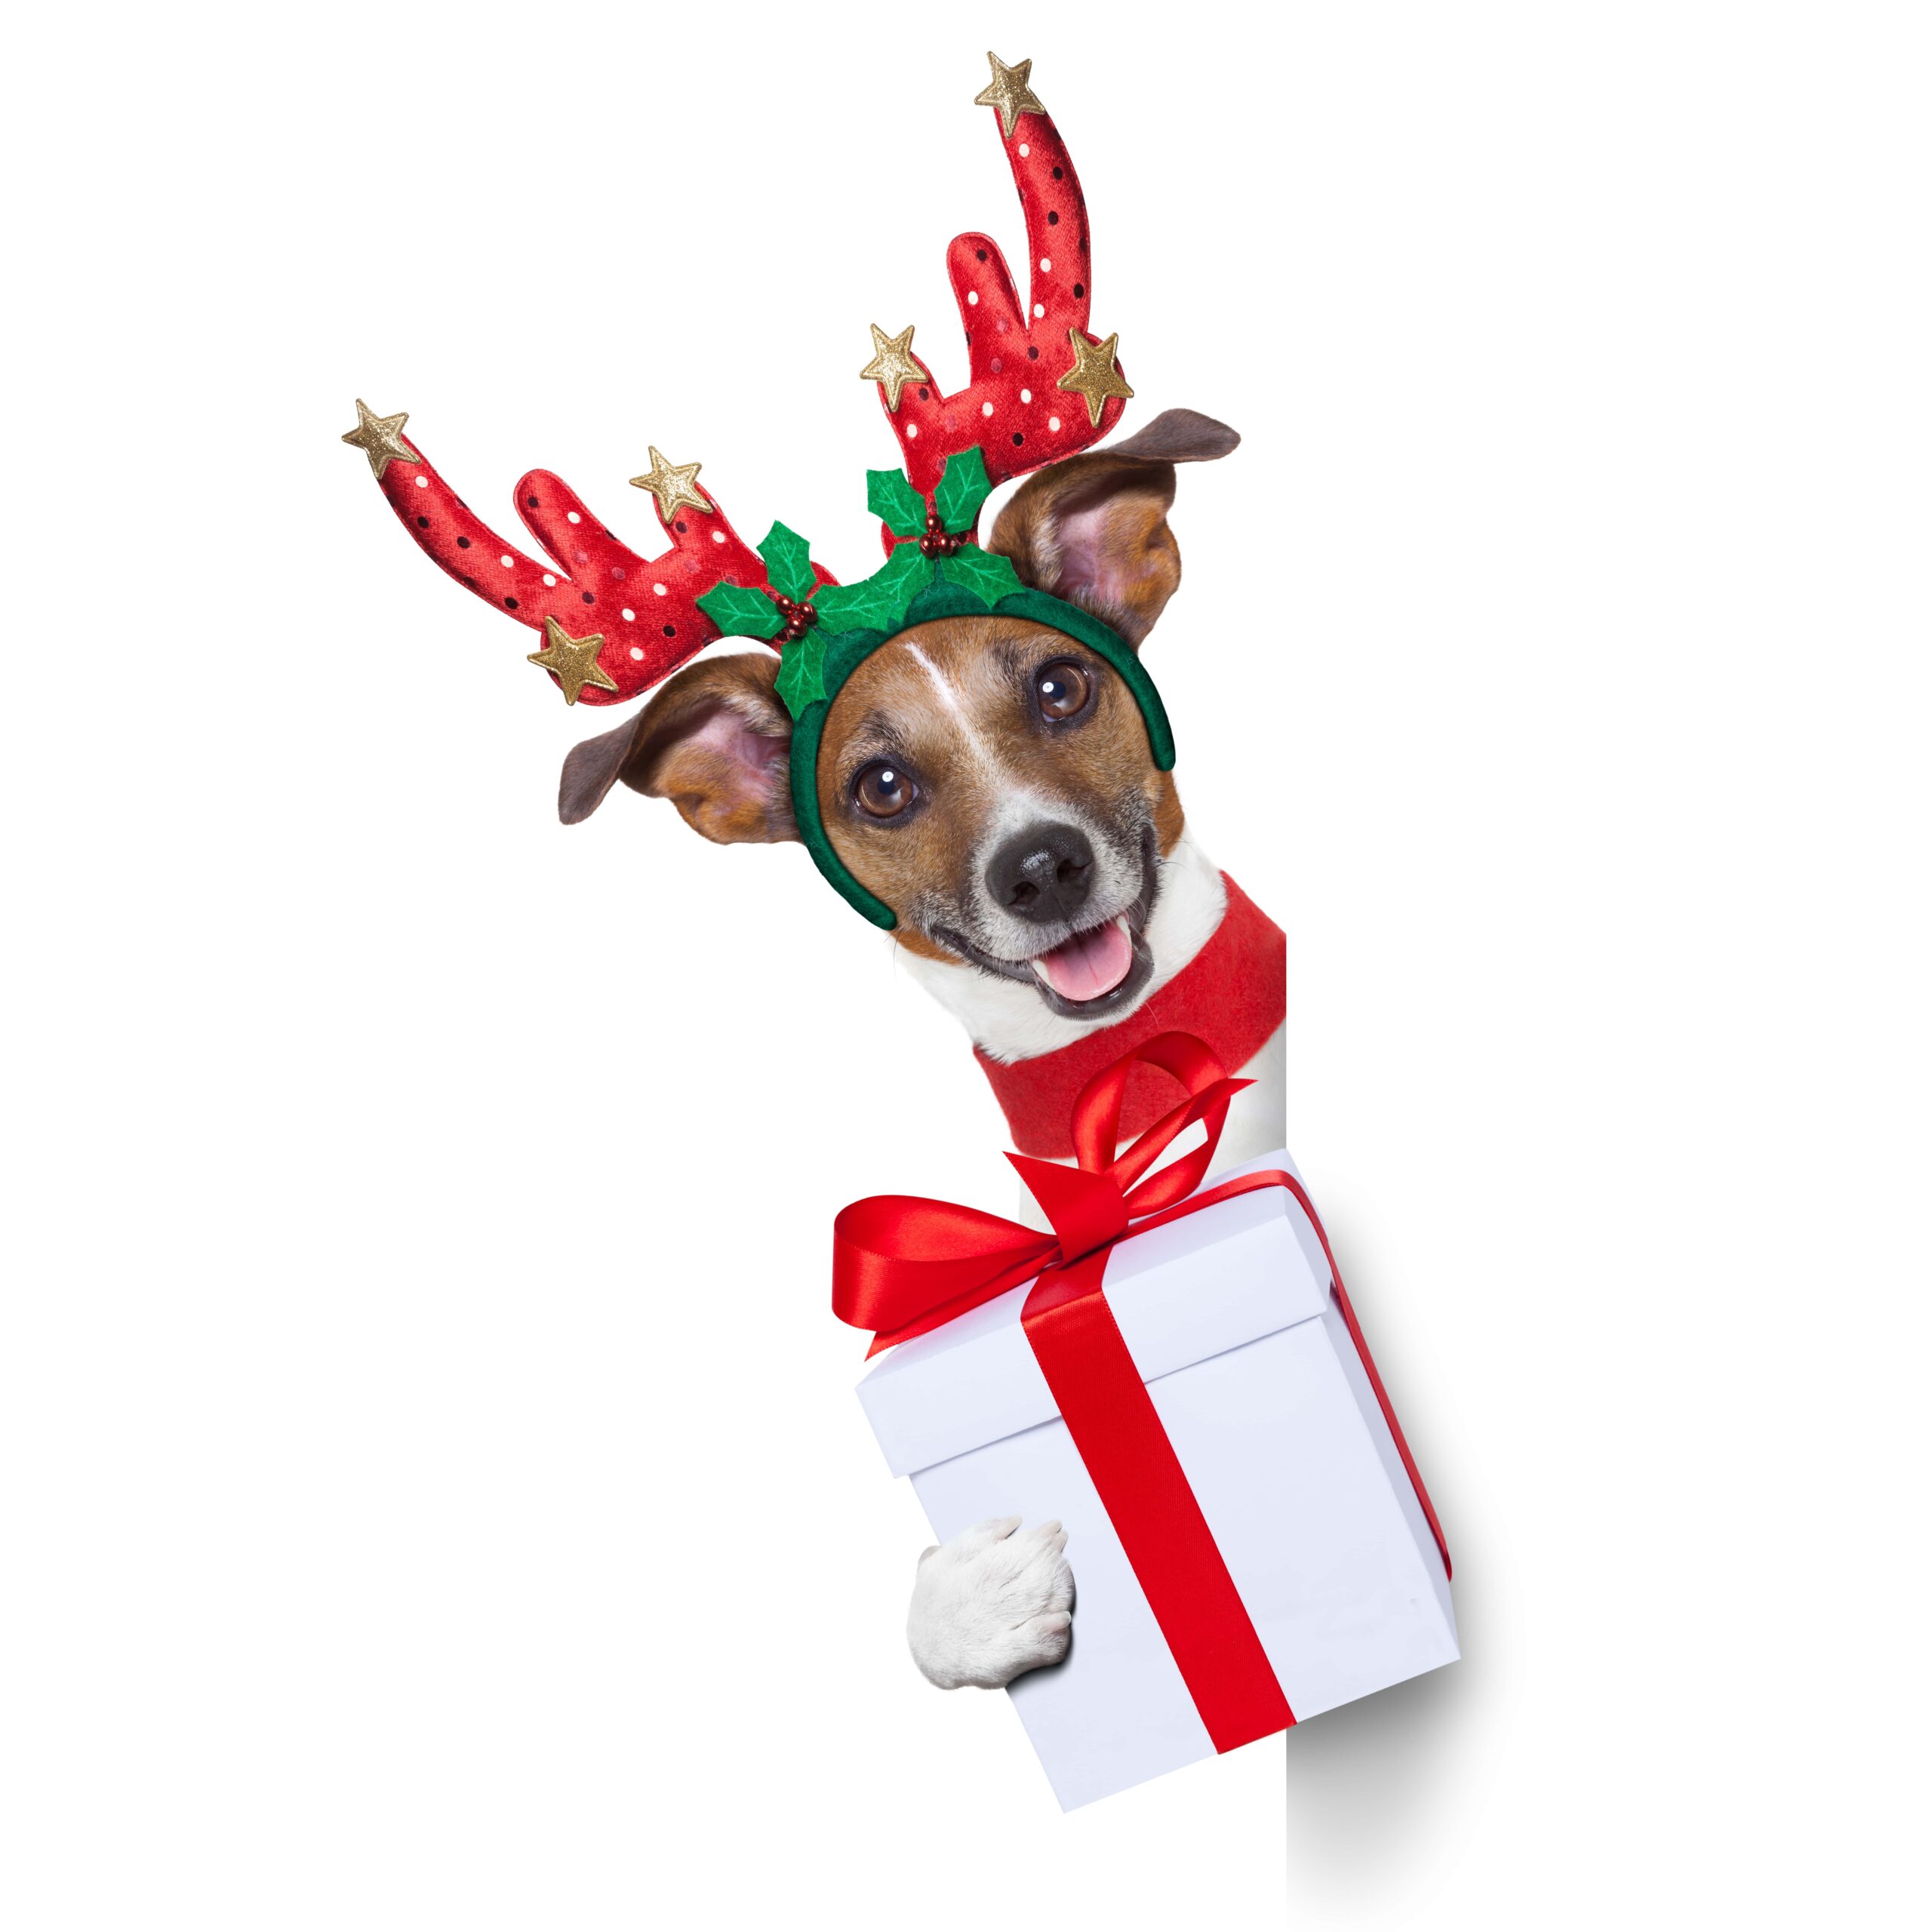 The Ultimate Christmas Gift List for Your Pets